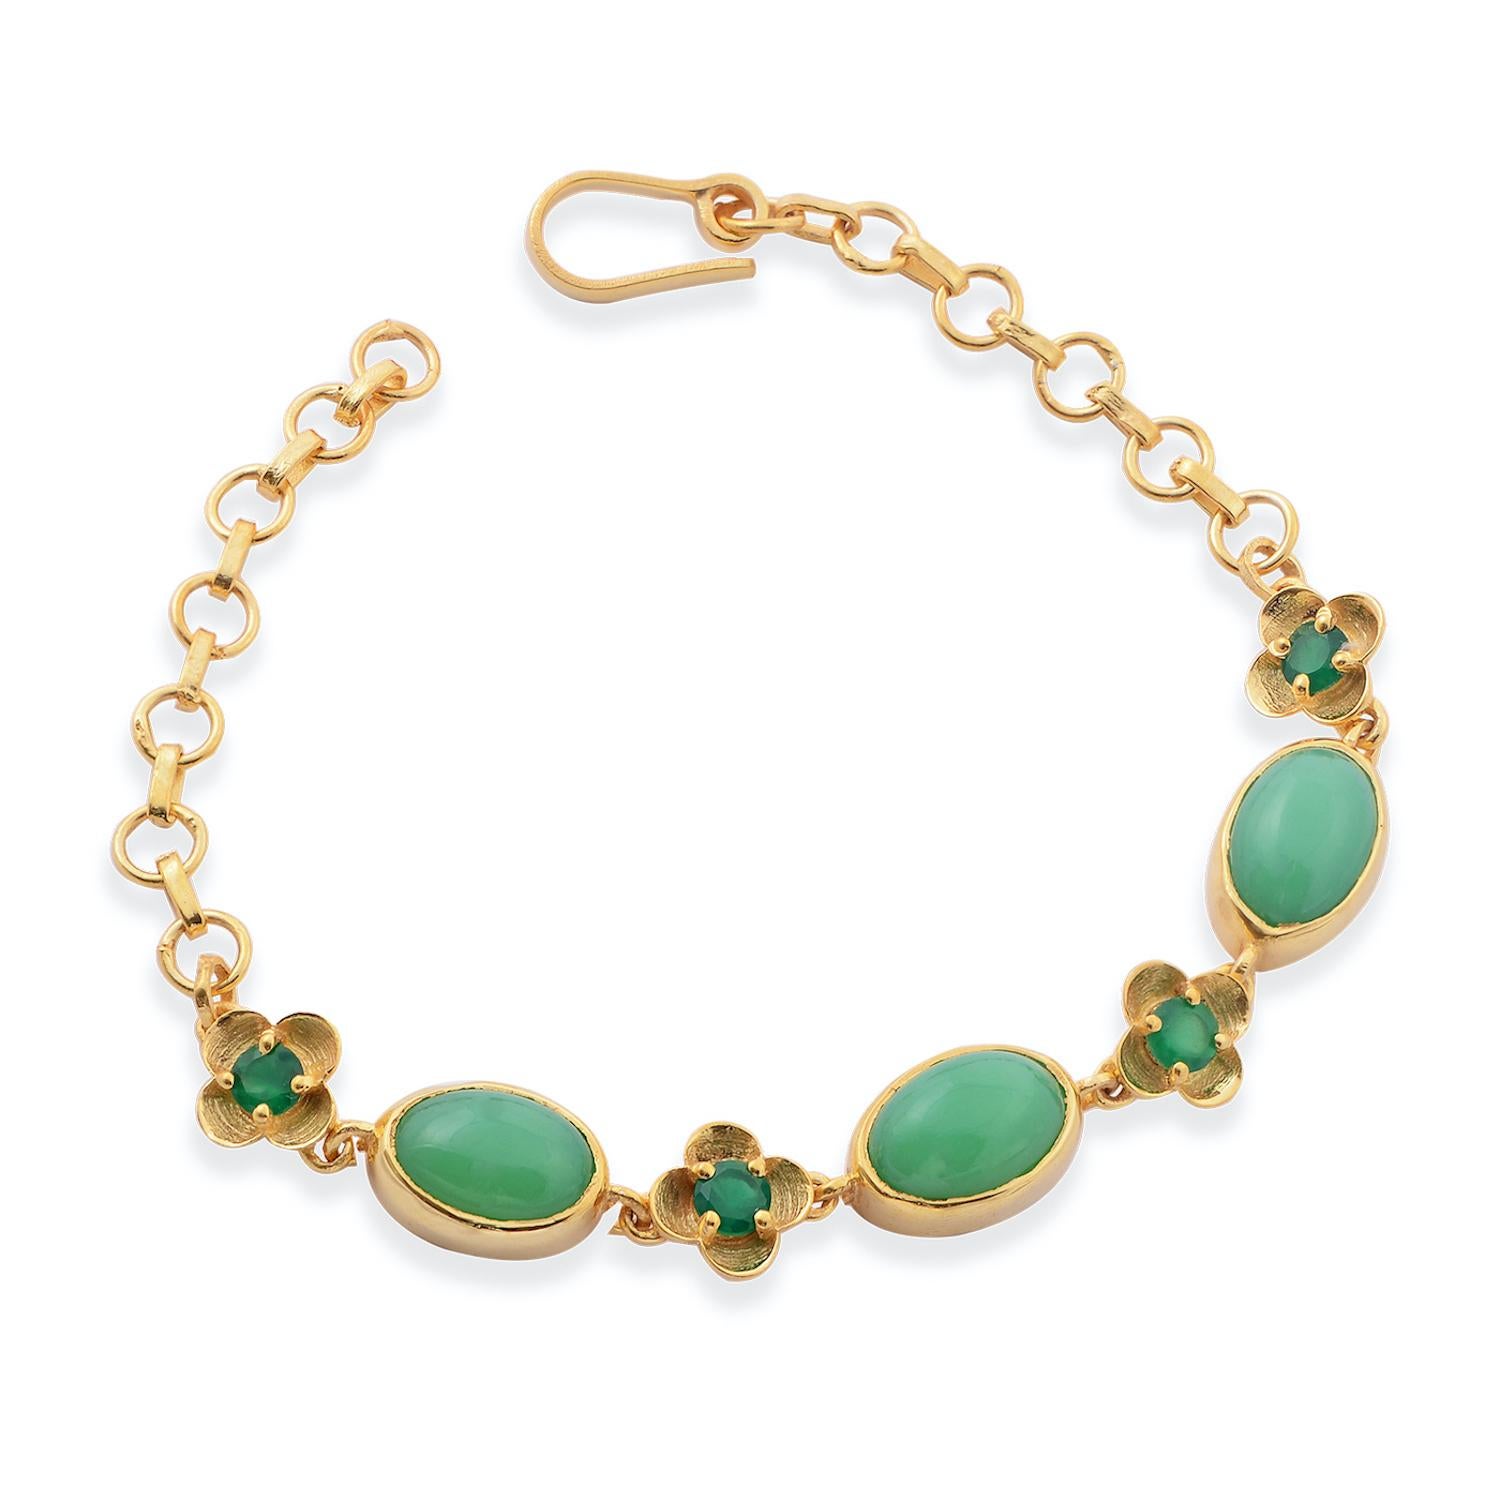 

This beautiful bracelet has been handmade in our workshops. We have interwoven chrysoprase with green onyx. The bracelet is made in sterling silver coated with 24kt gold plate and is adjustable so will fit anyone.

Central motif dimensions are 9mm